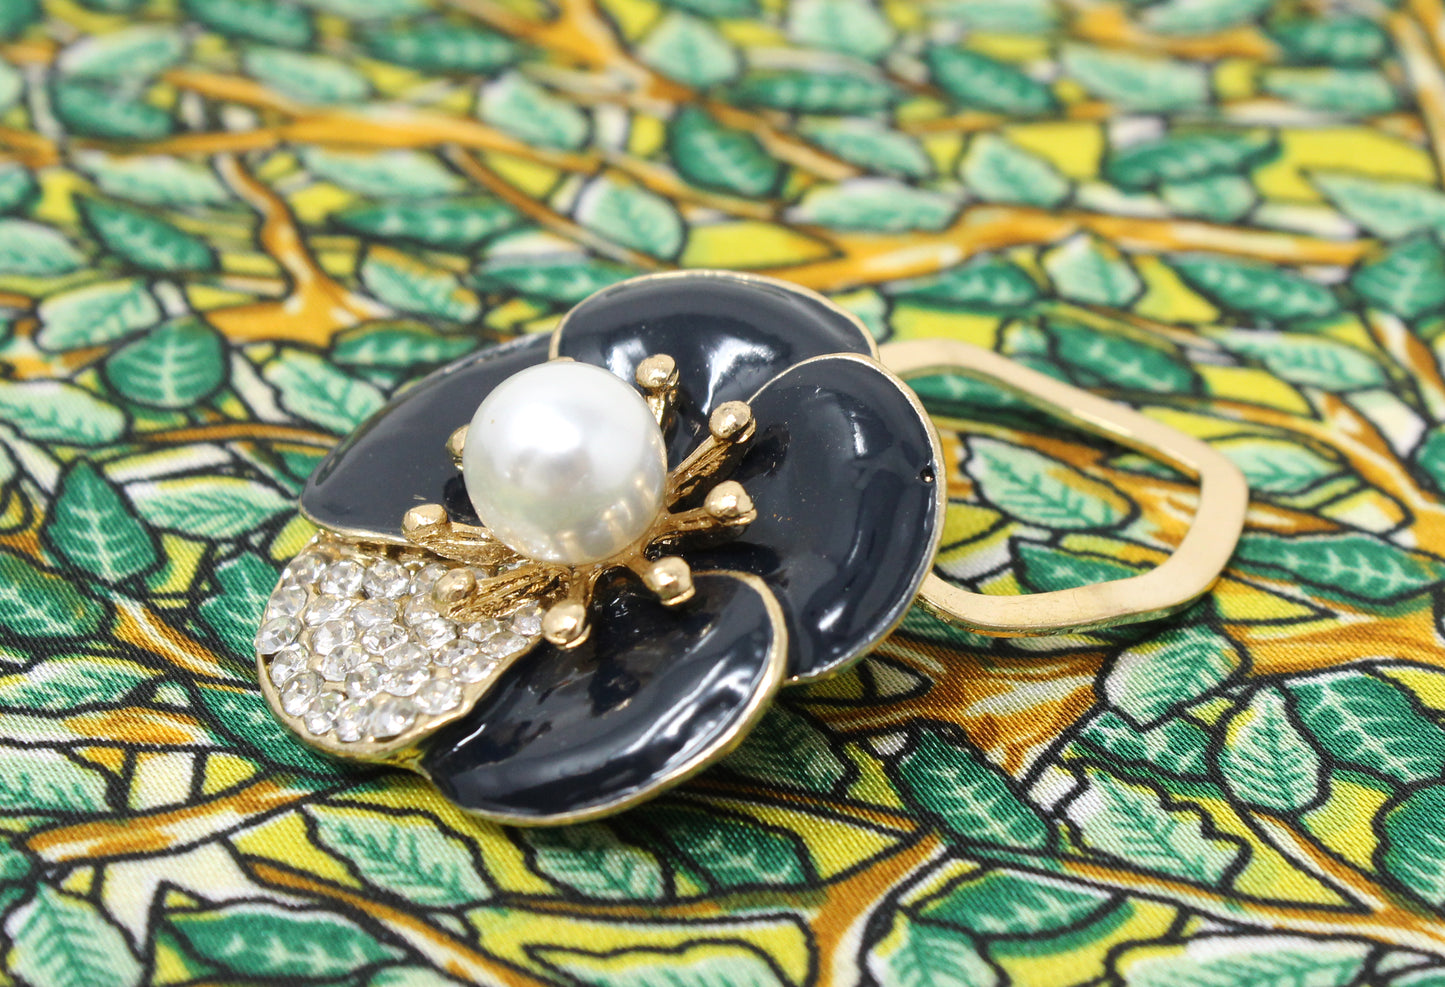 Two Tone Pearl Brooch